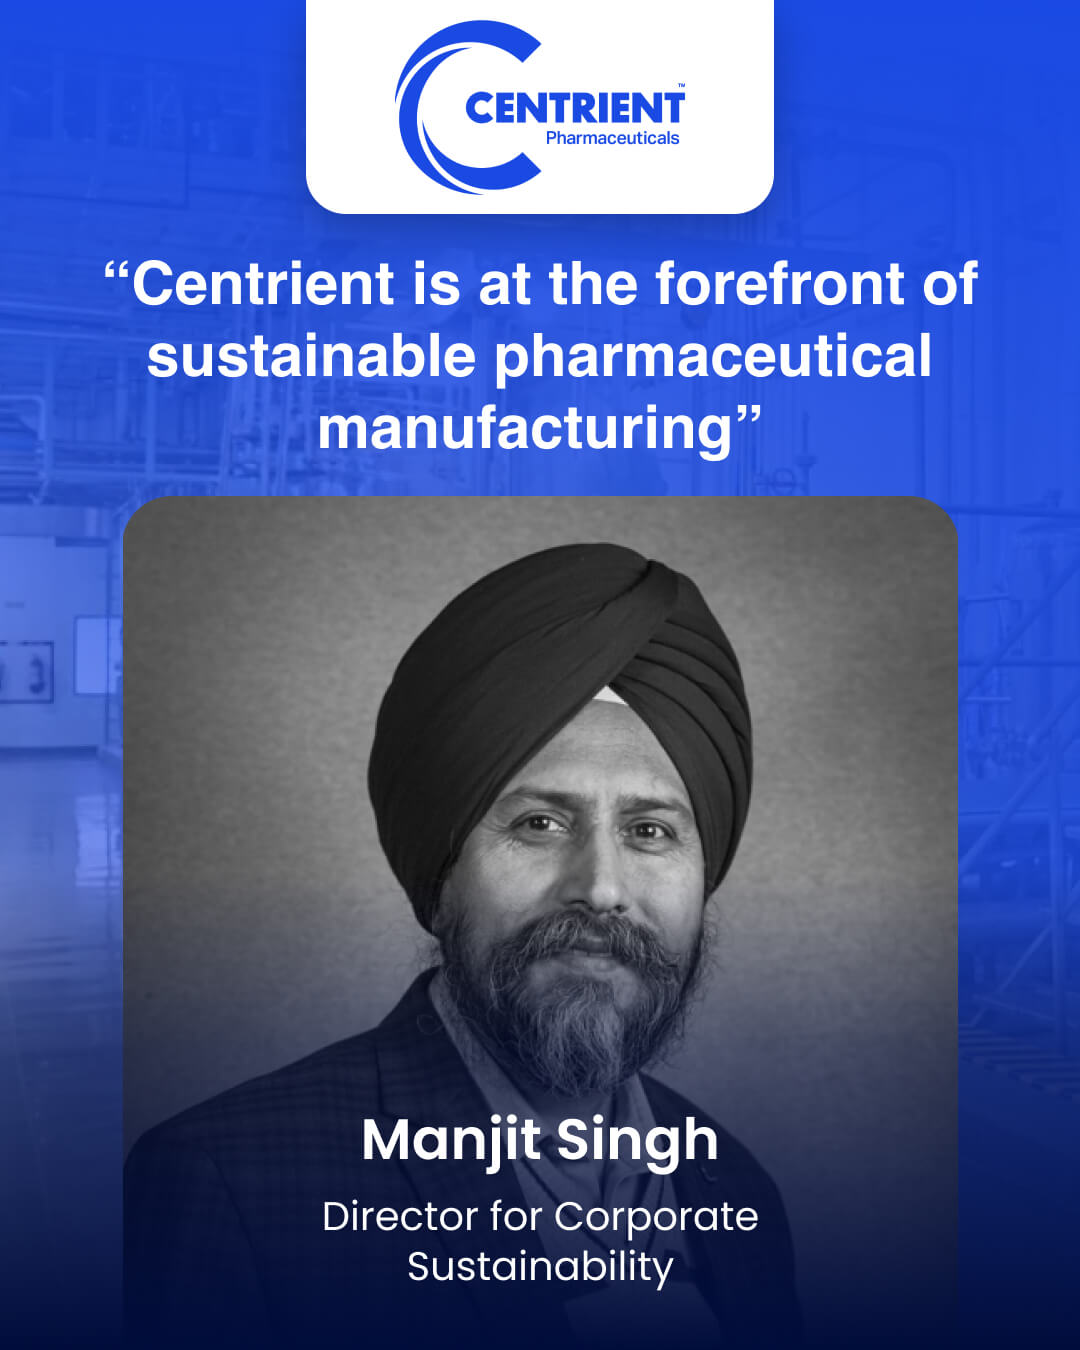 “Centrient is at the forefront of sustainable pharmaceutical manufacturing”